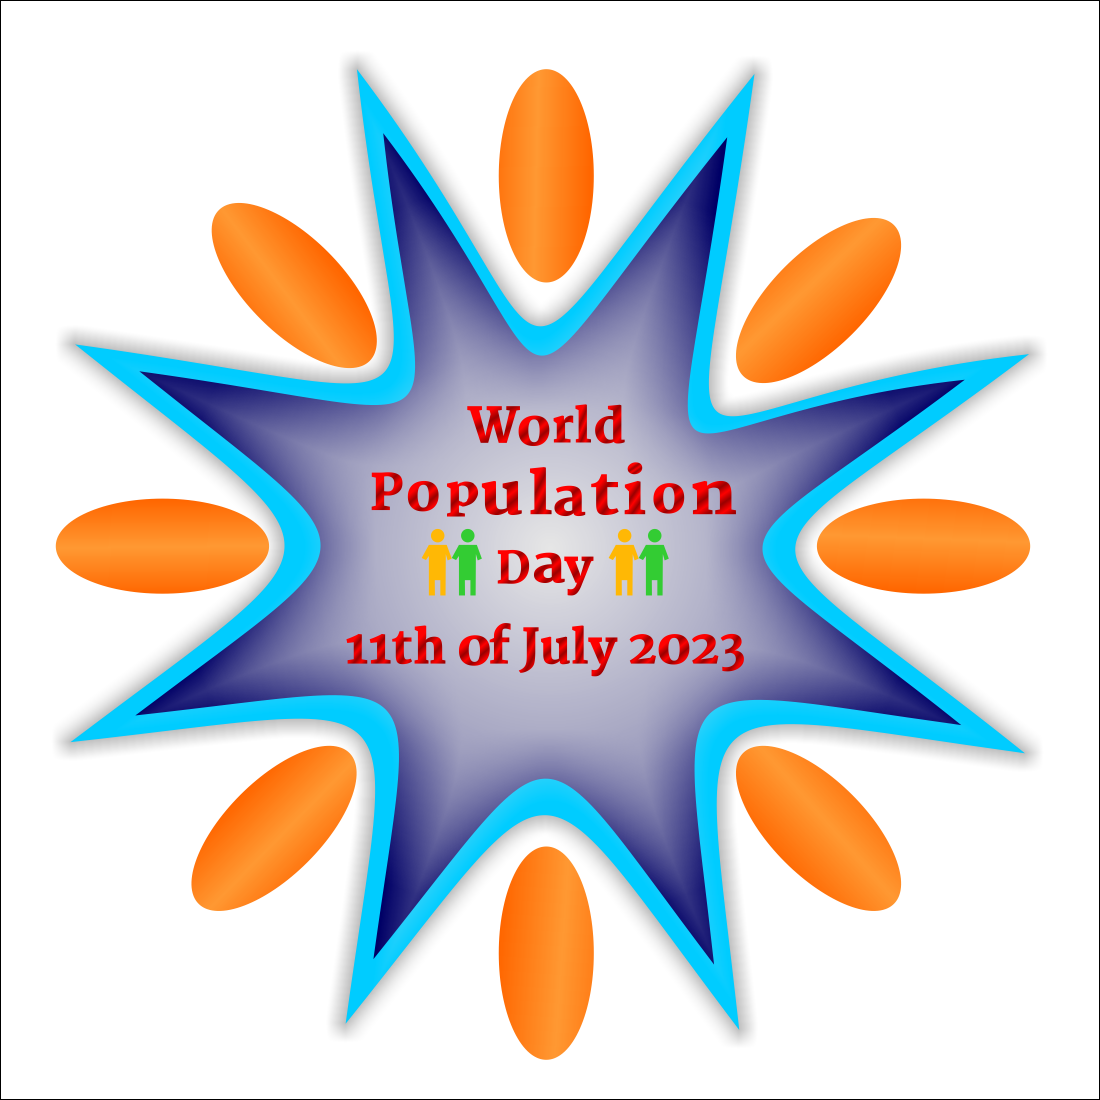 World Population Day 11th of july cover image.